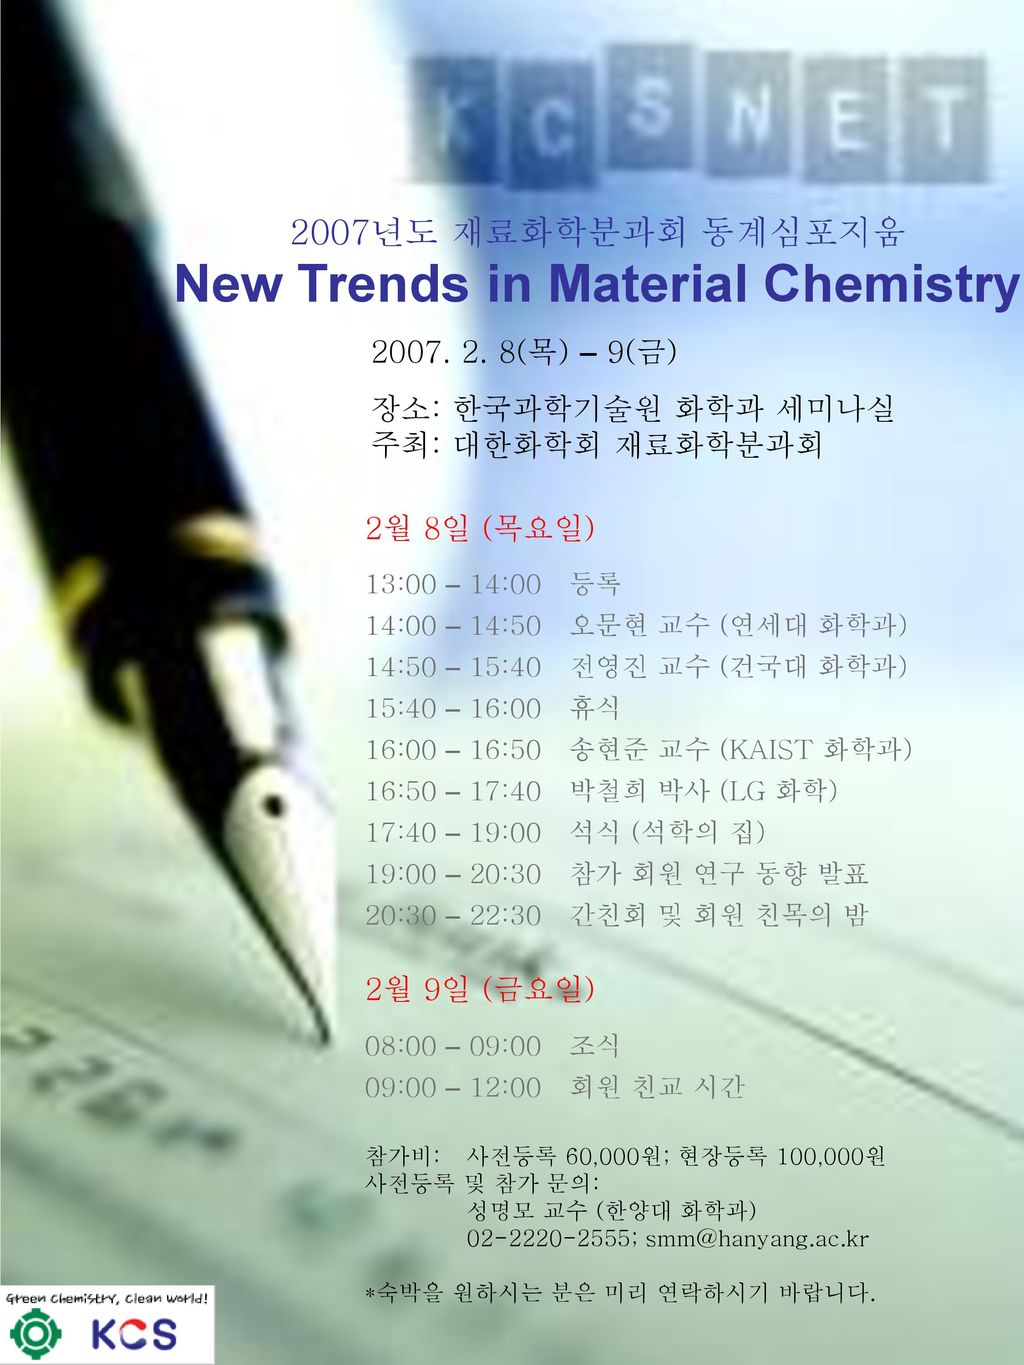 New Trends in Material Chemistry